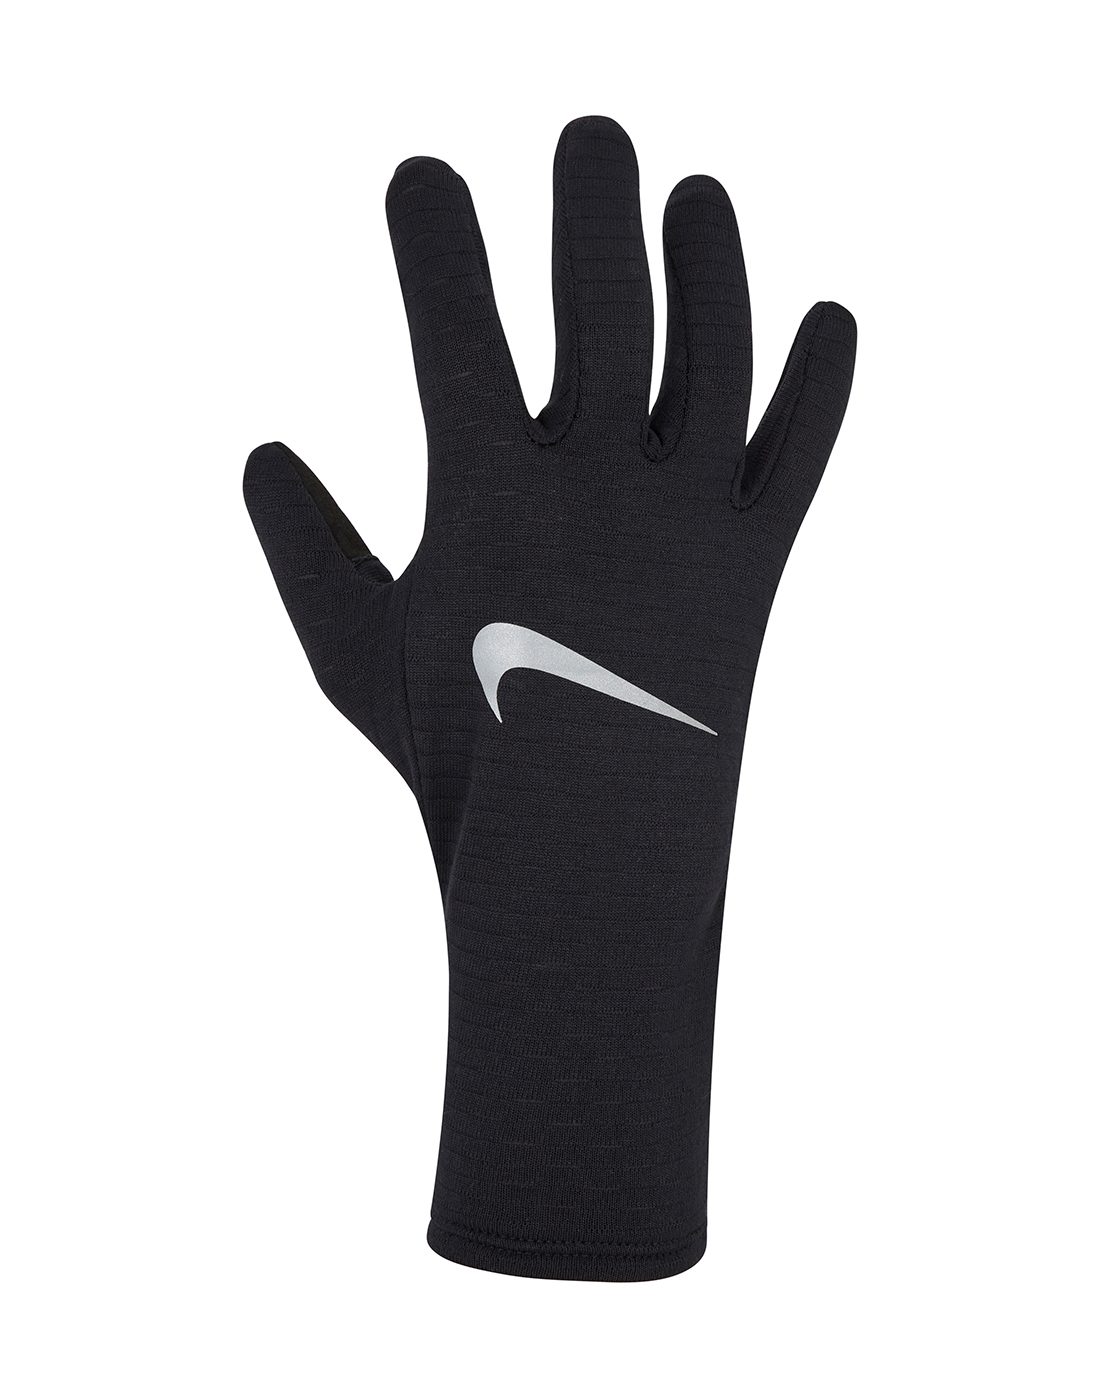 Nike Womens Sphere Running Gloves 3.0 - Black | Life Style Sports IE